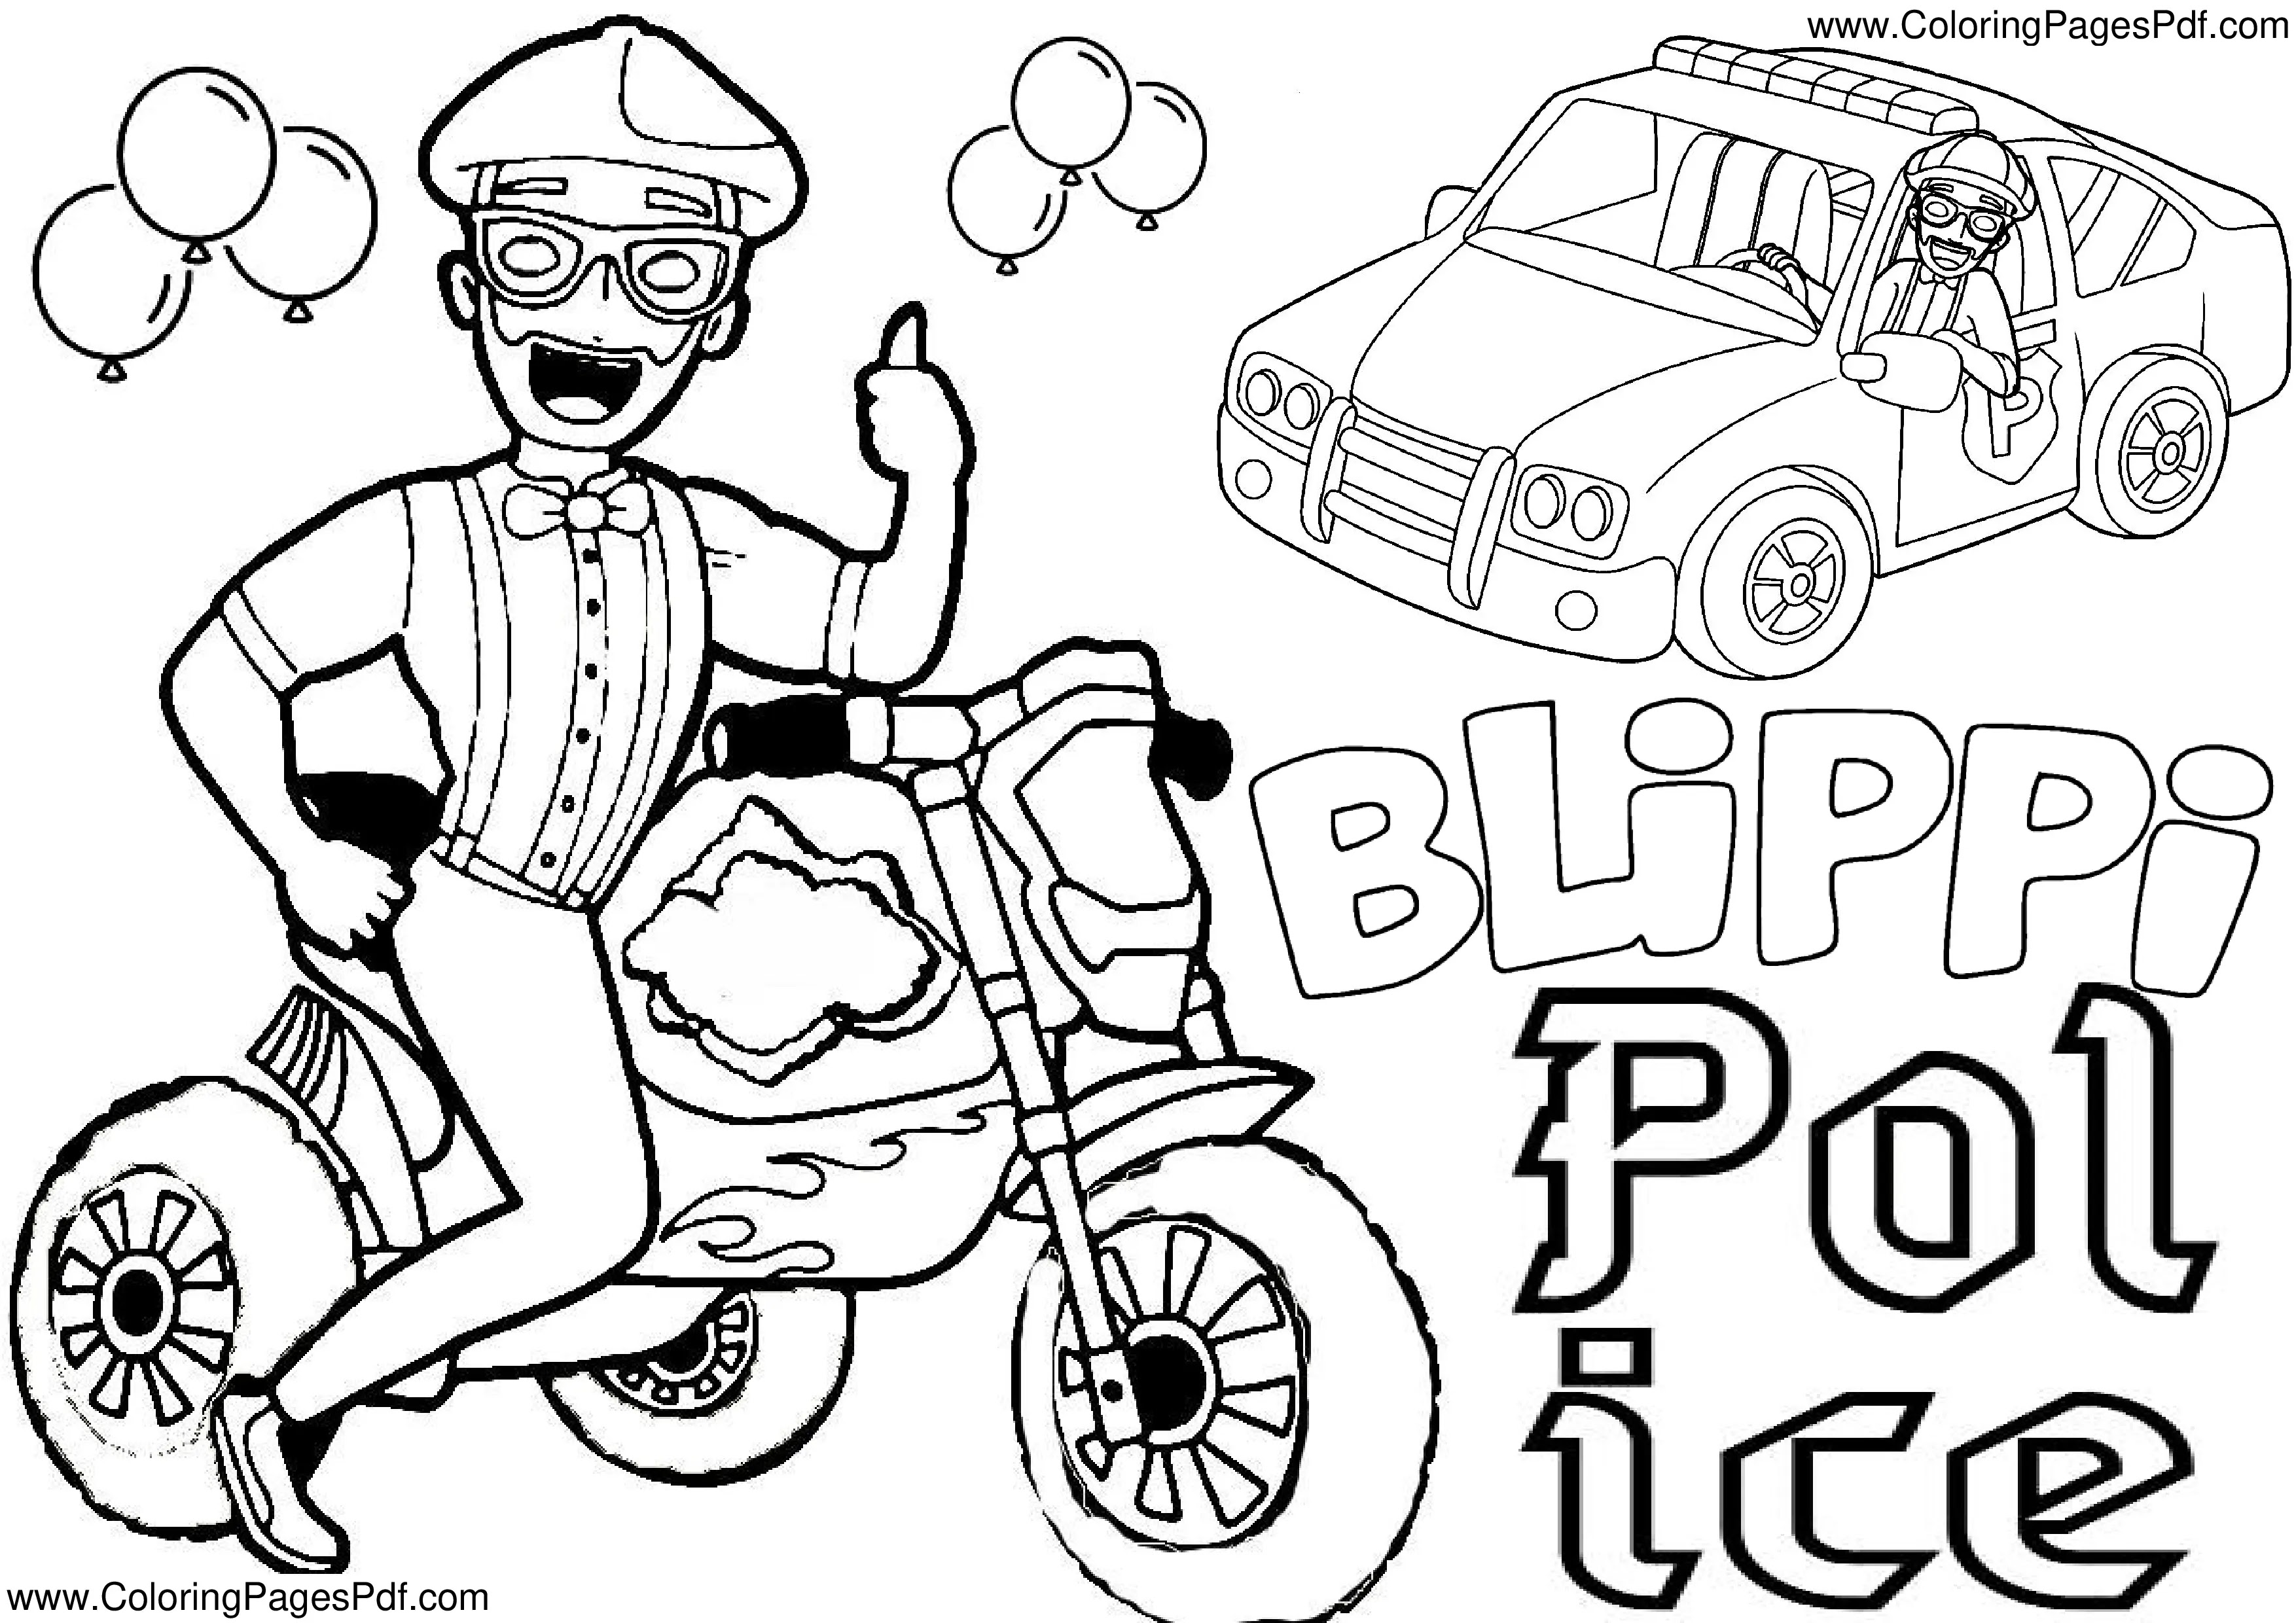 Blippi coloring pages for adults